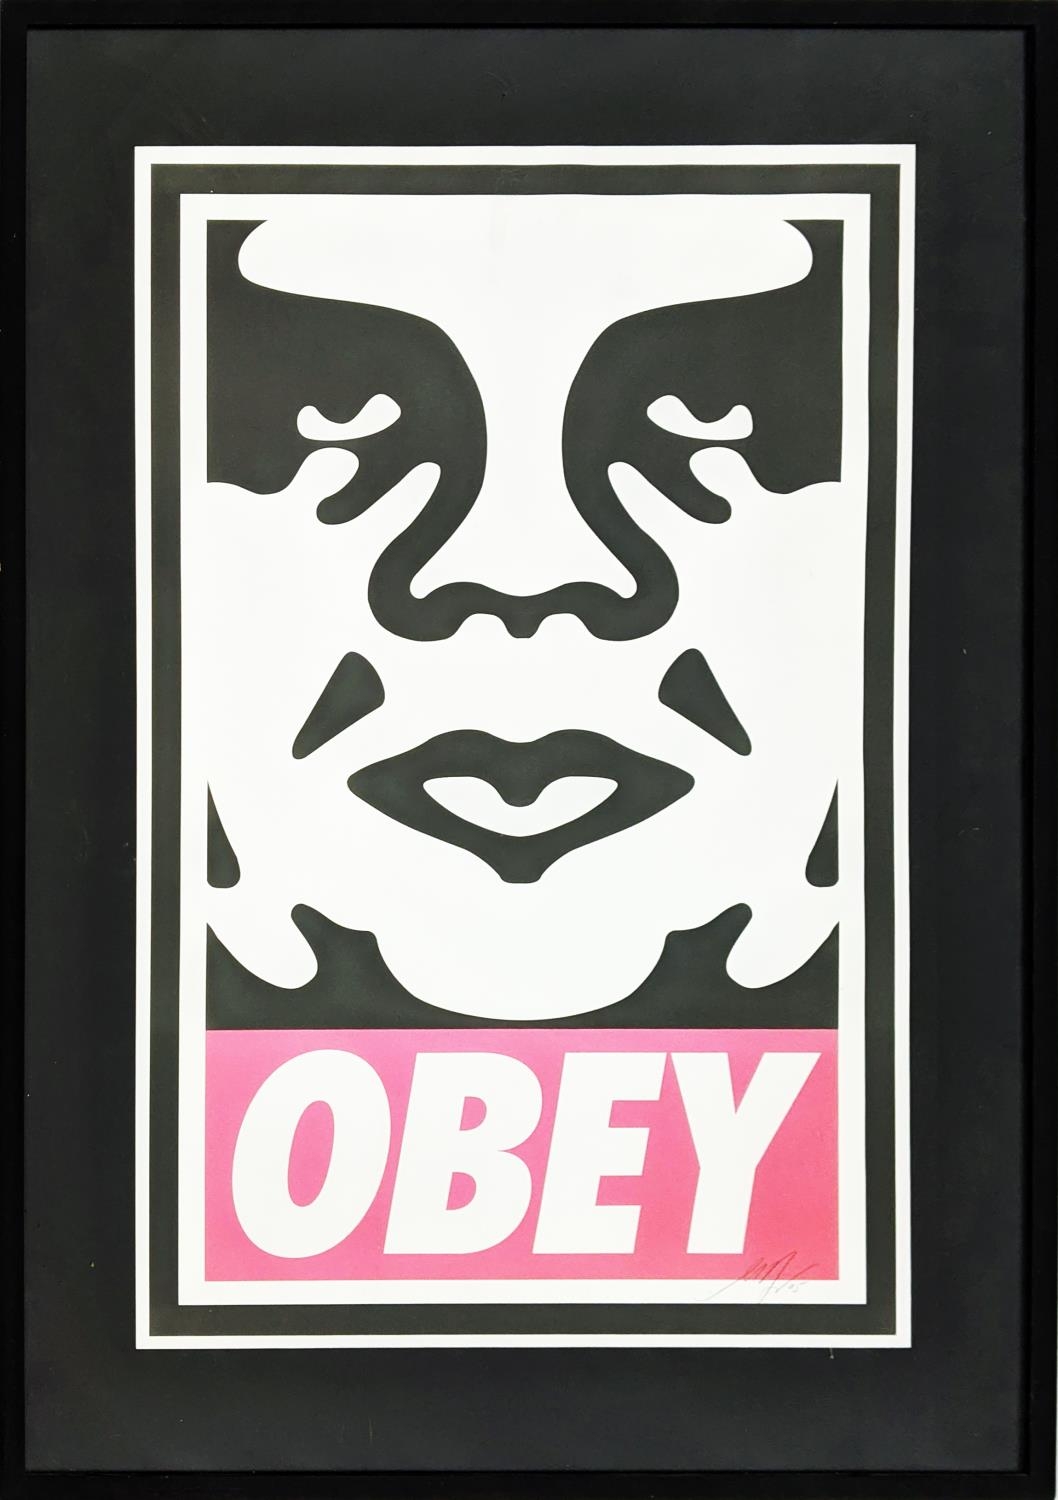 SHEPARD FAIREY, 'Obey', lithograph, signed in pencil, framed.